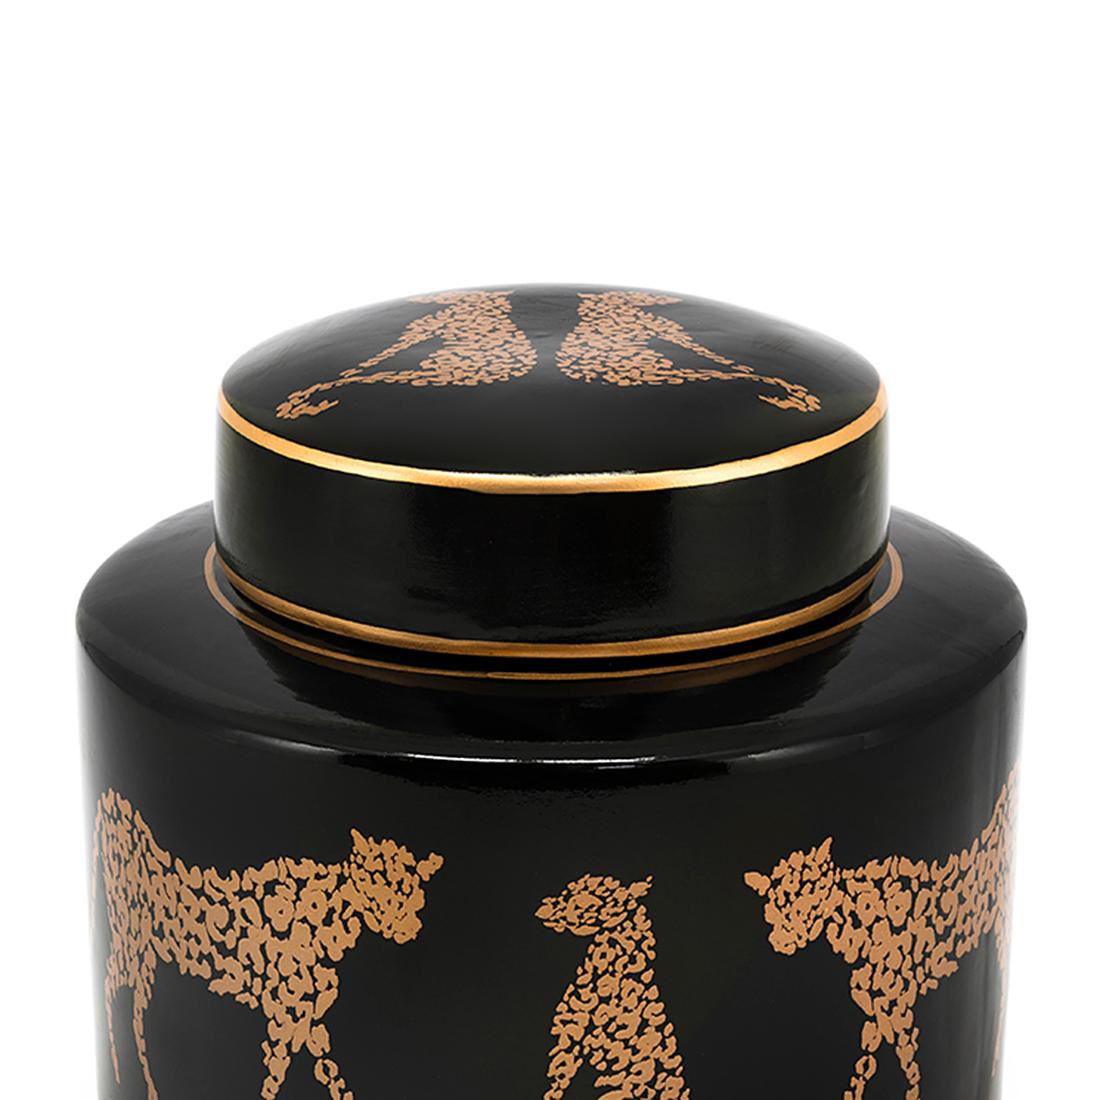 Box leopard in ceramic in black
finish with leopards. Box with lid.
Also available in white finish.